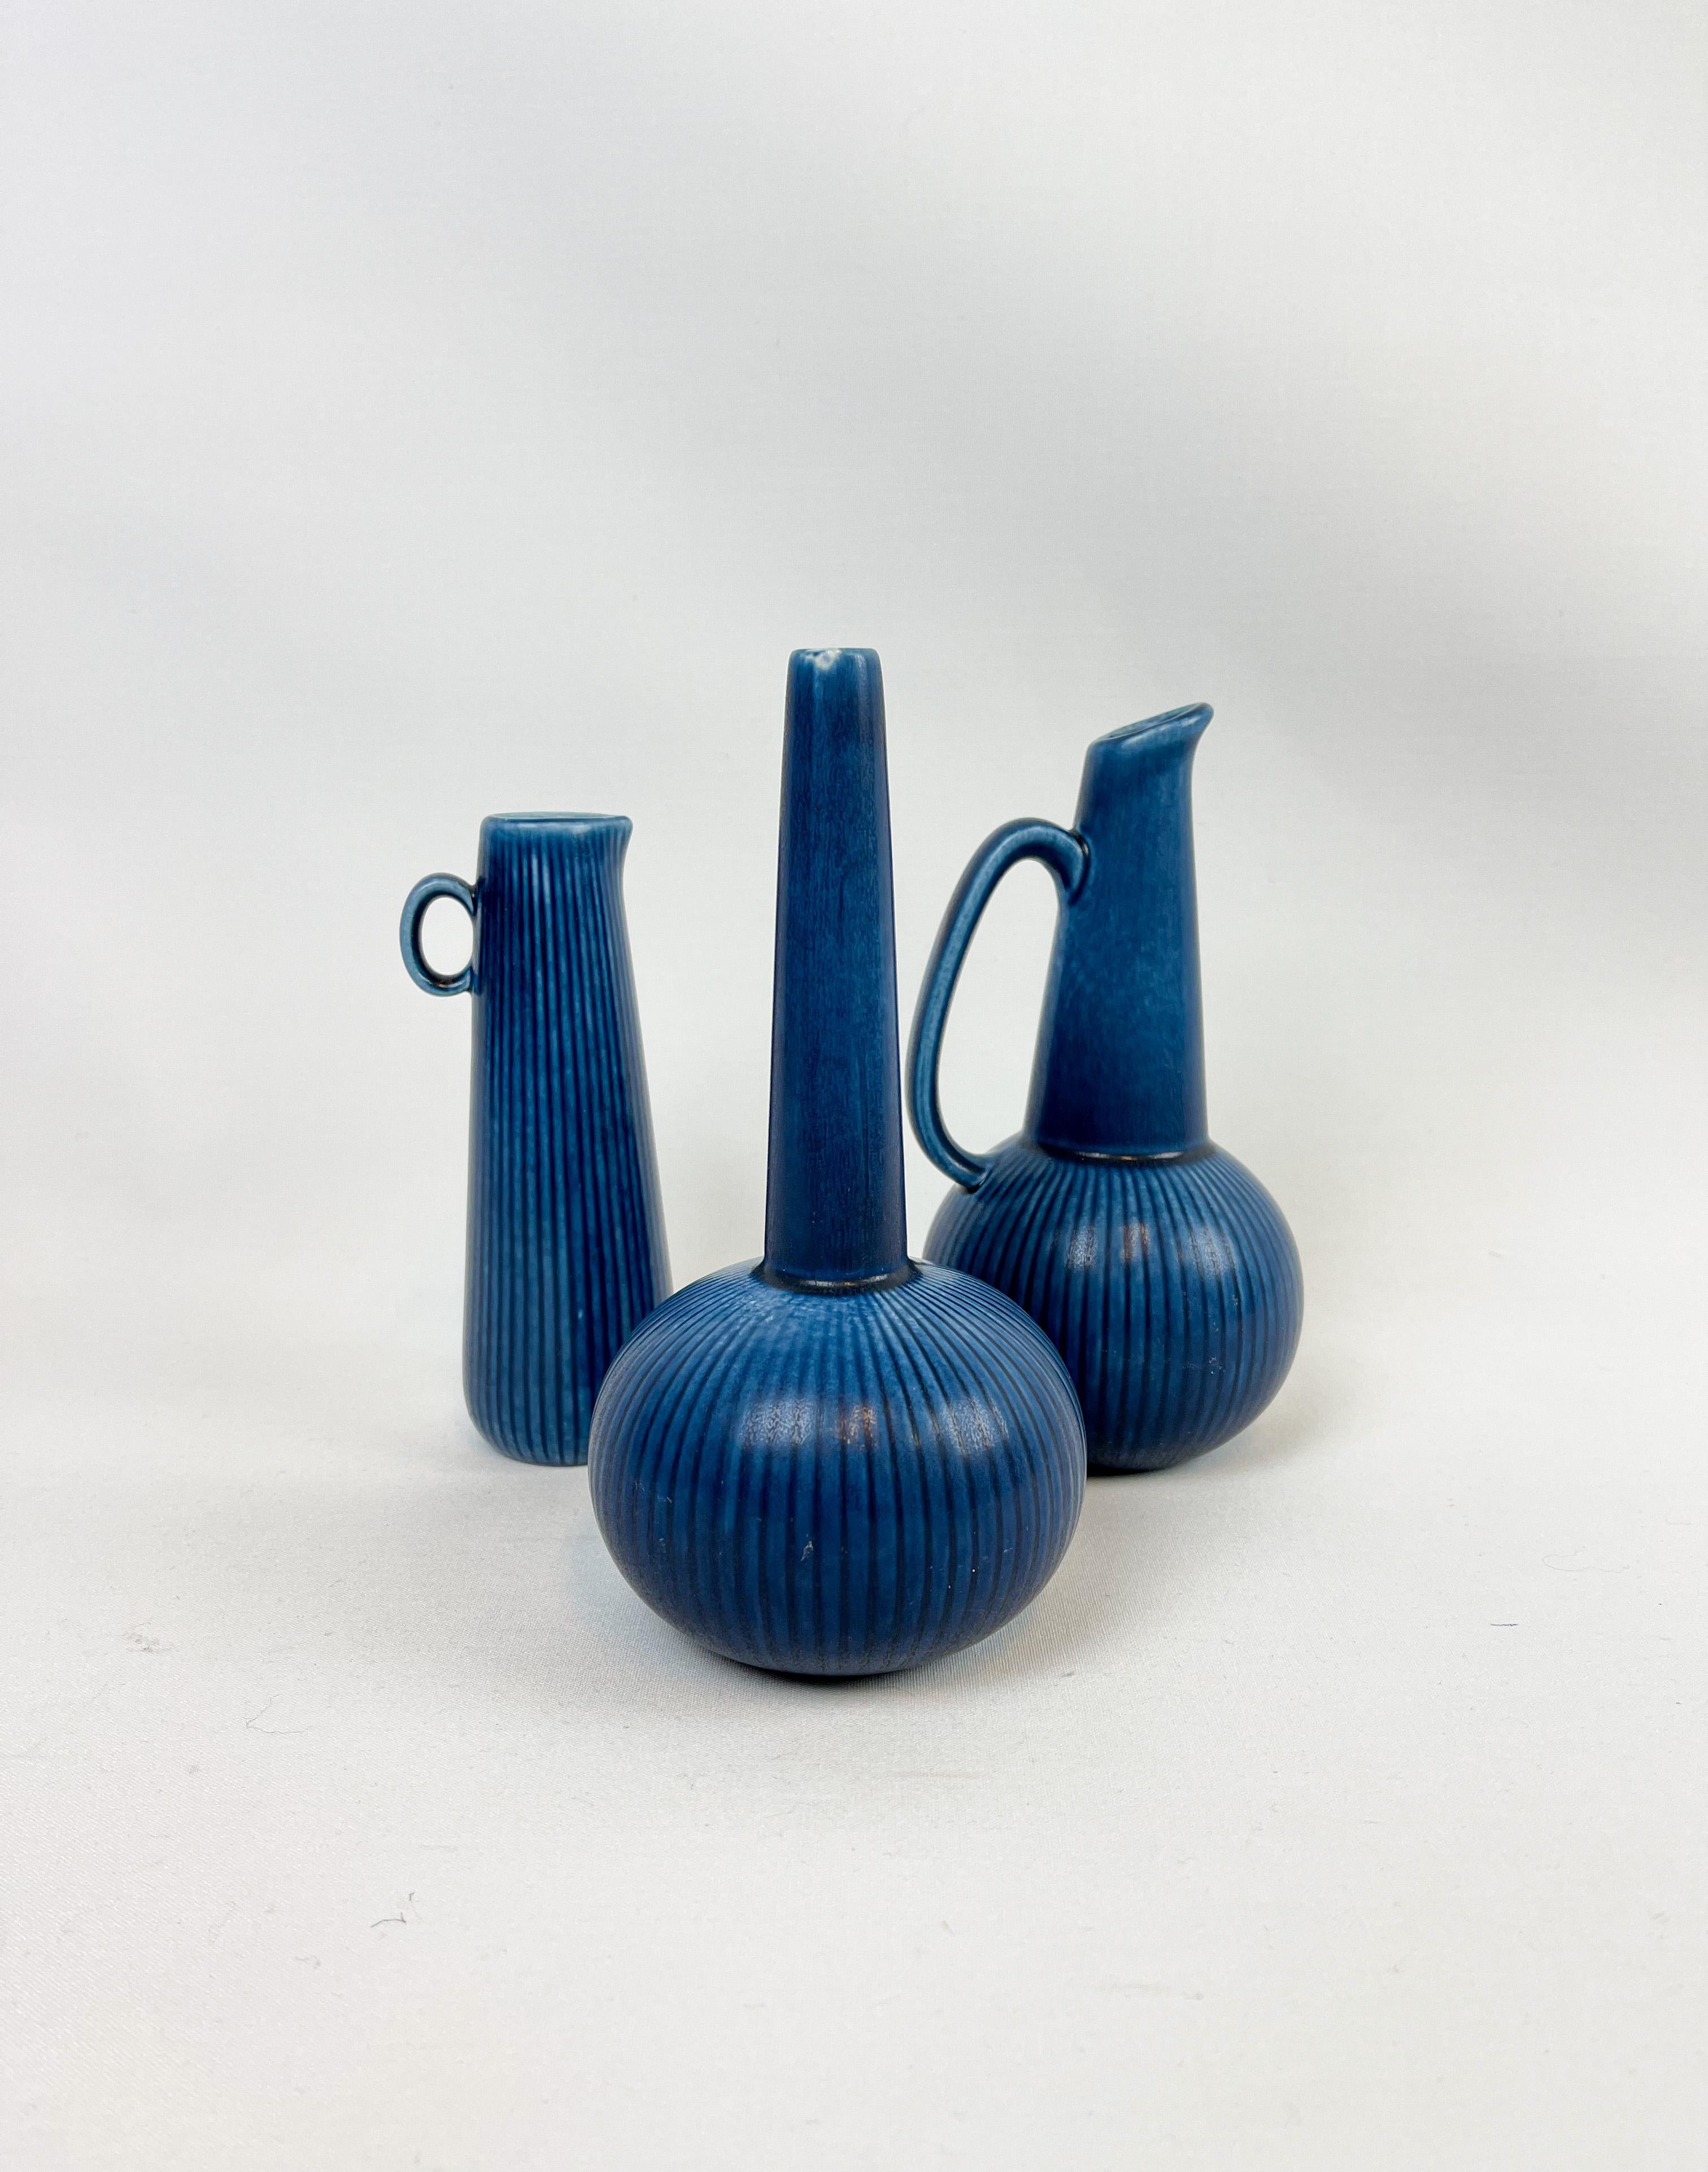 Wonderful blue glaze on these 3 vases from Rörstrand Sweden, designed by Gunnar Nylund in the 1950s.

They are all in good vintage condition. 

Dimensions: H 20, D 10 cm/ H 18 cm, D 6 cm.
   